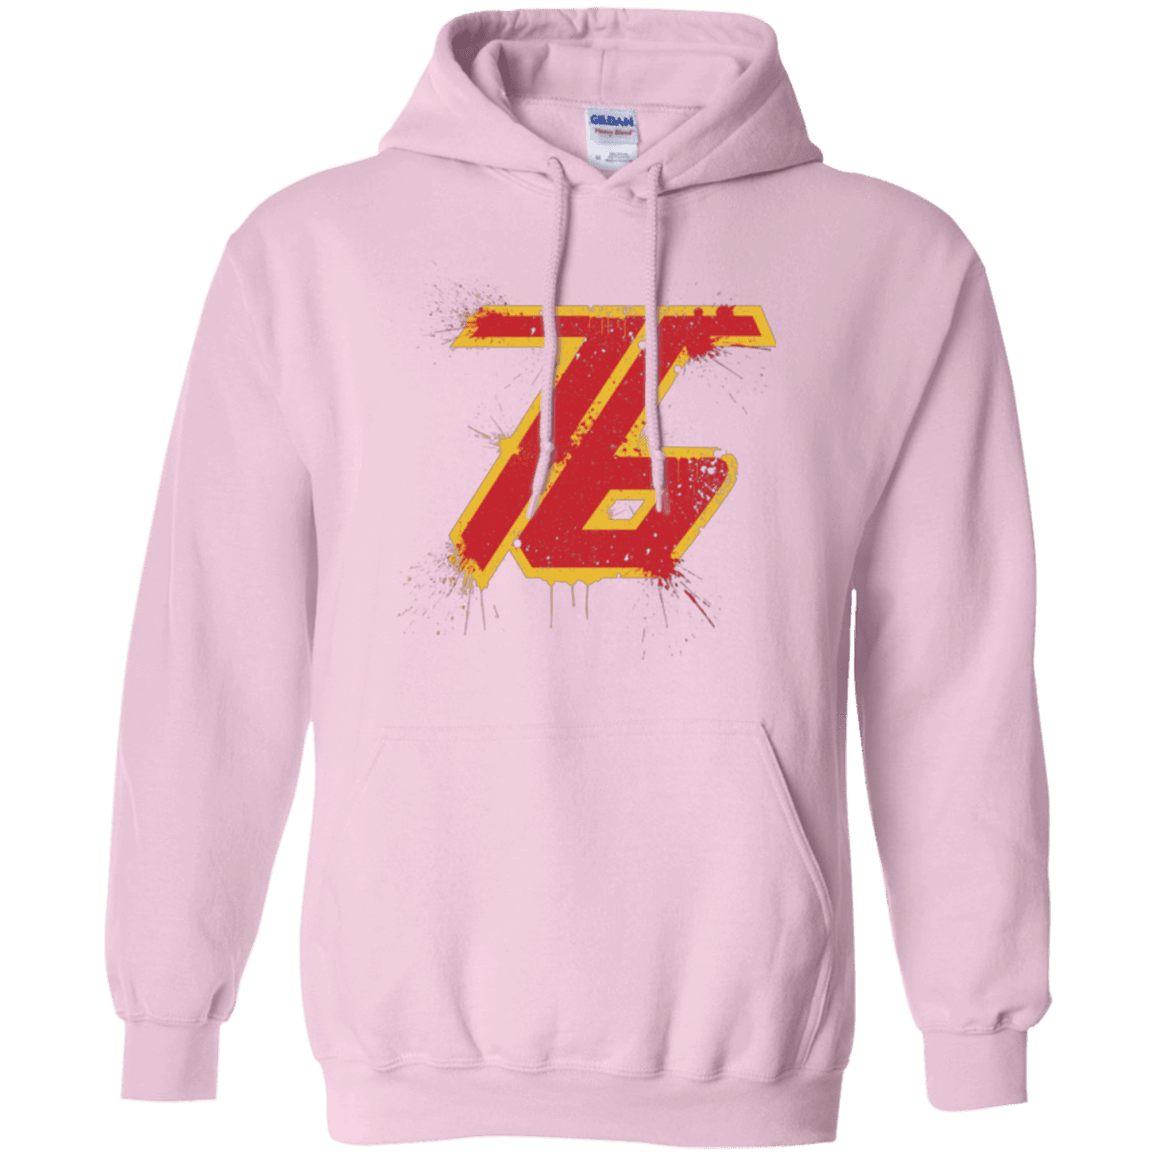 Sweatshirts Light Pink / Small Soldier 76 Pullover Hoodie SK